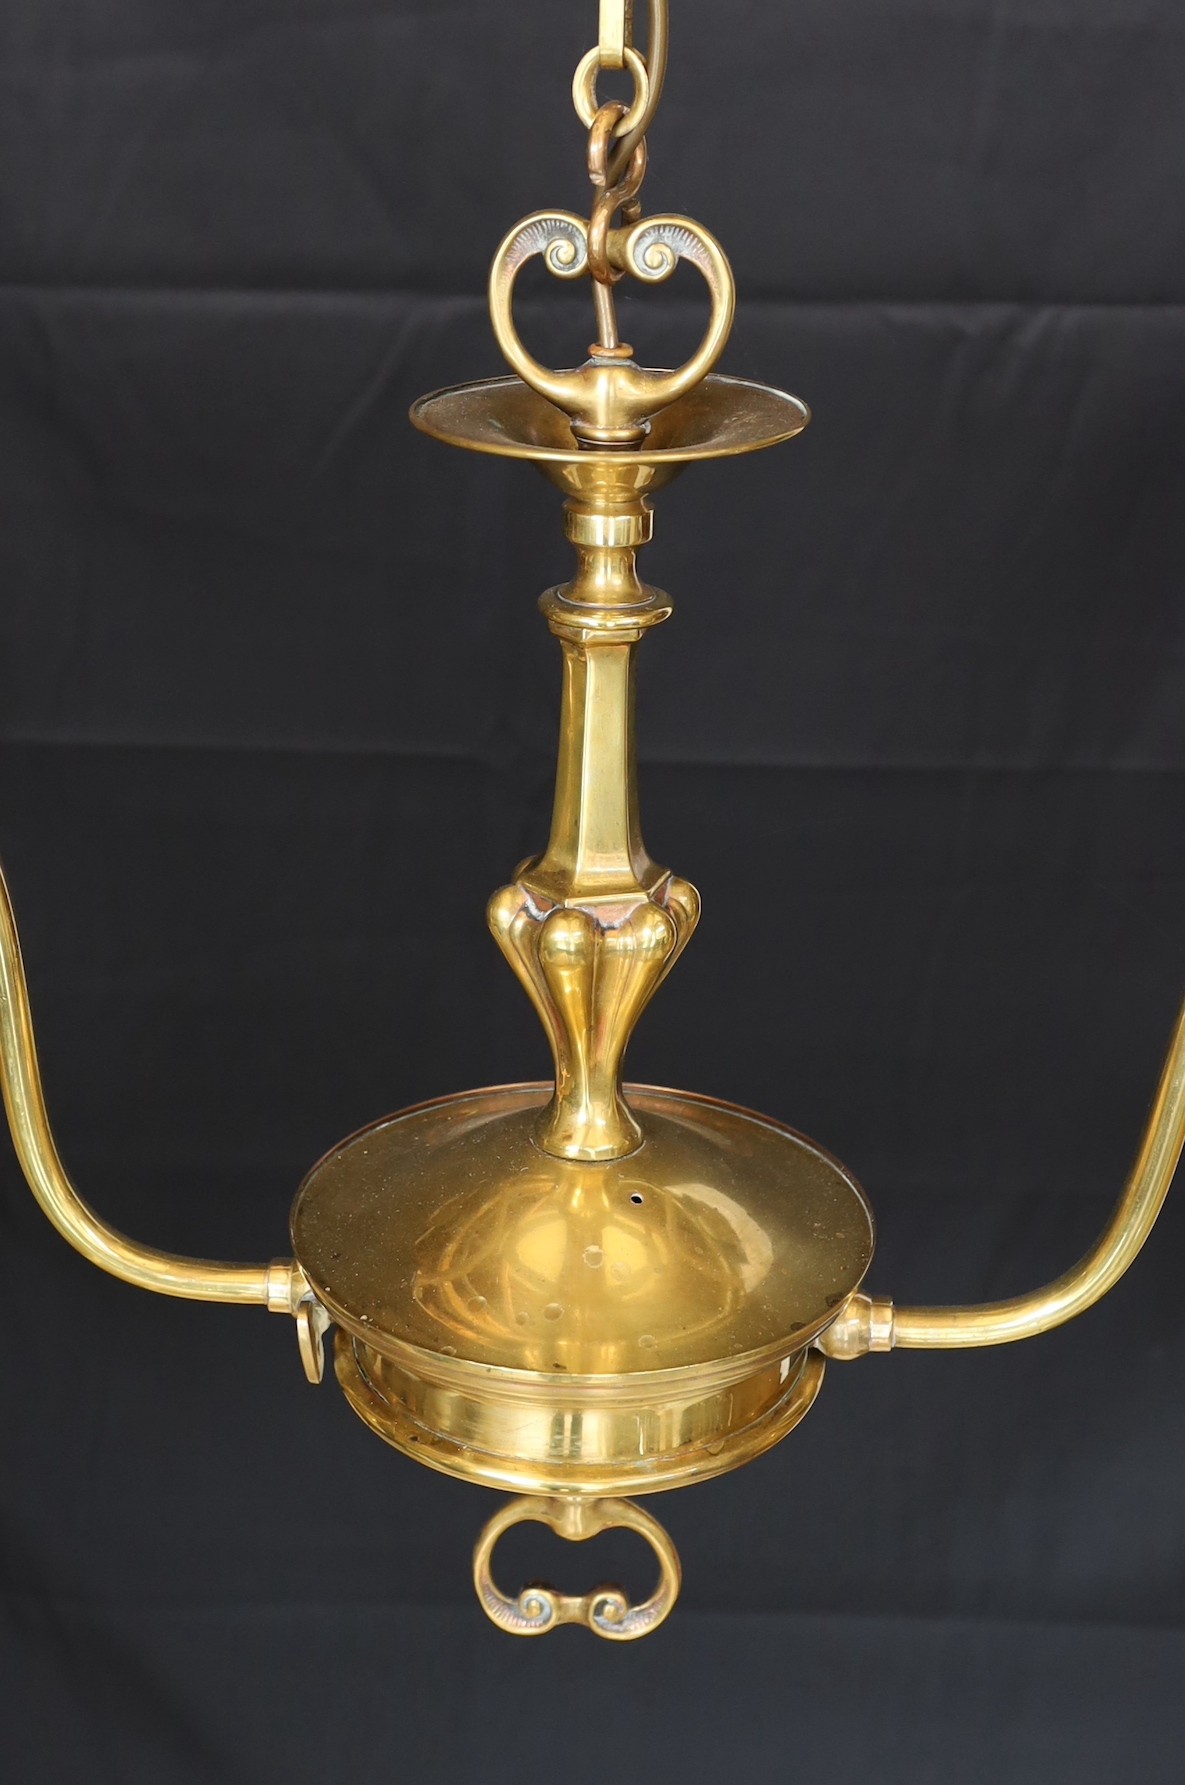 An early 20th century English brass twin branch light fitting with amber tinted tall glass shades - Image 4 of 4